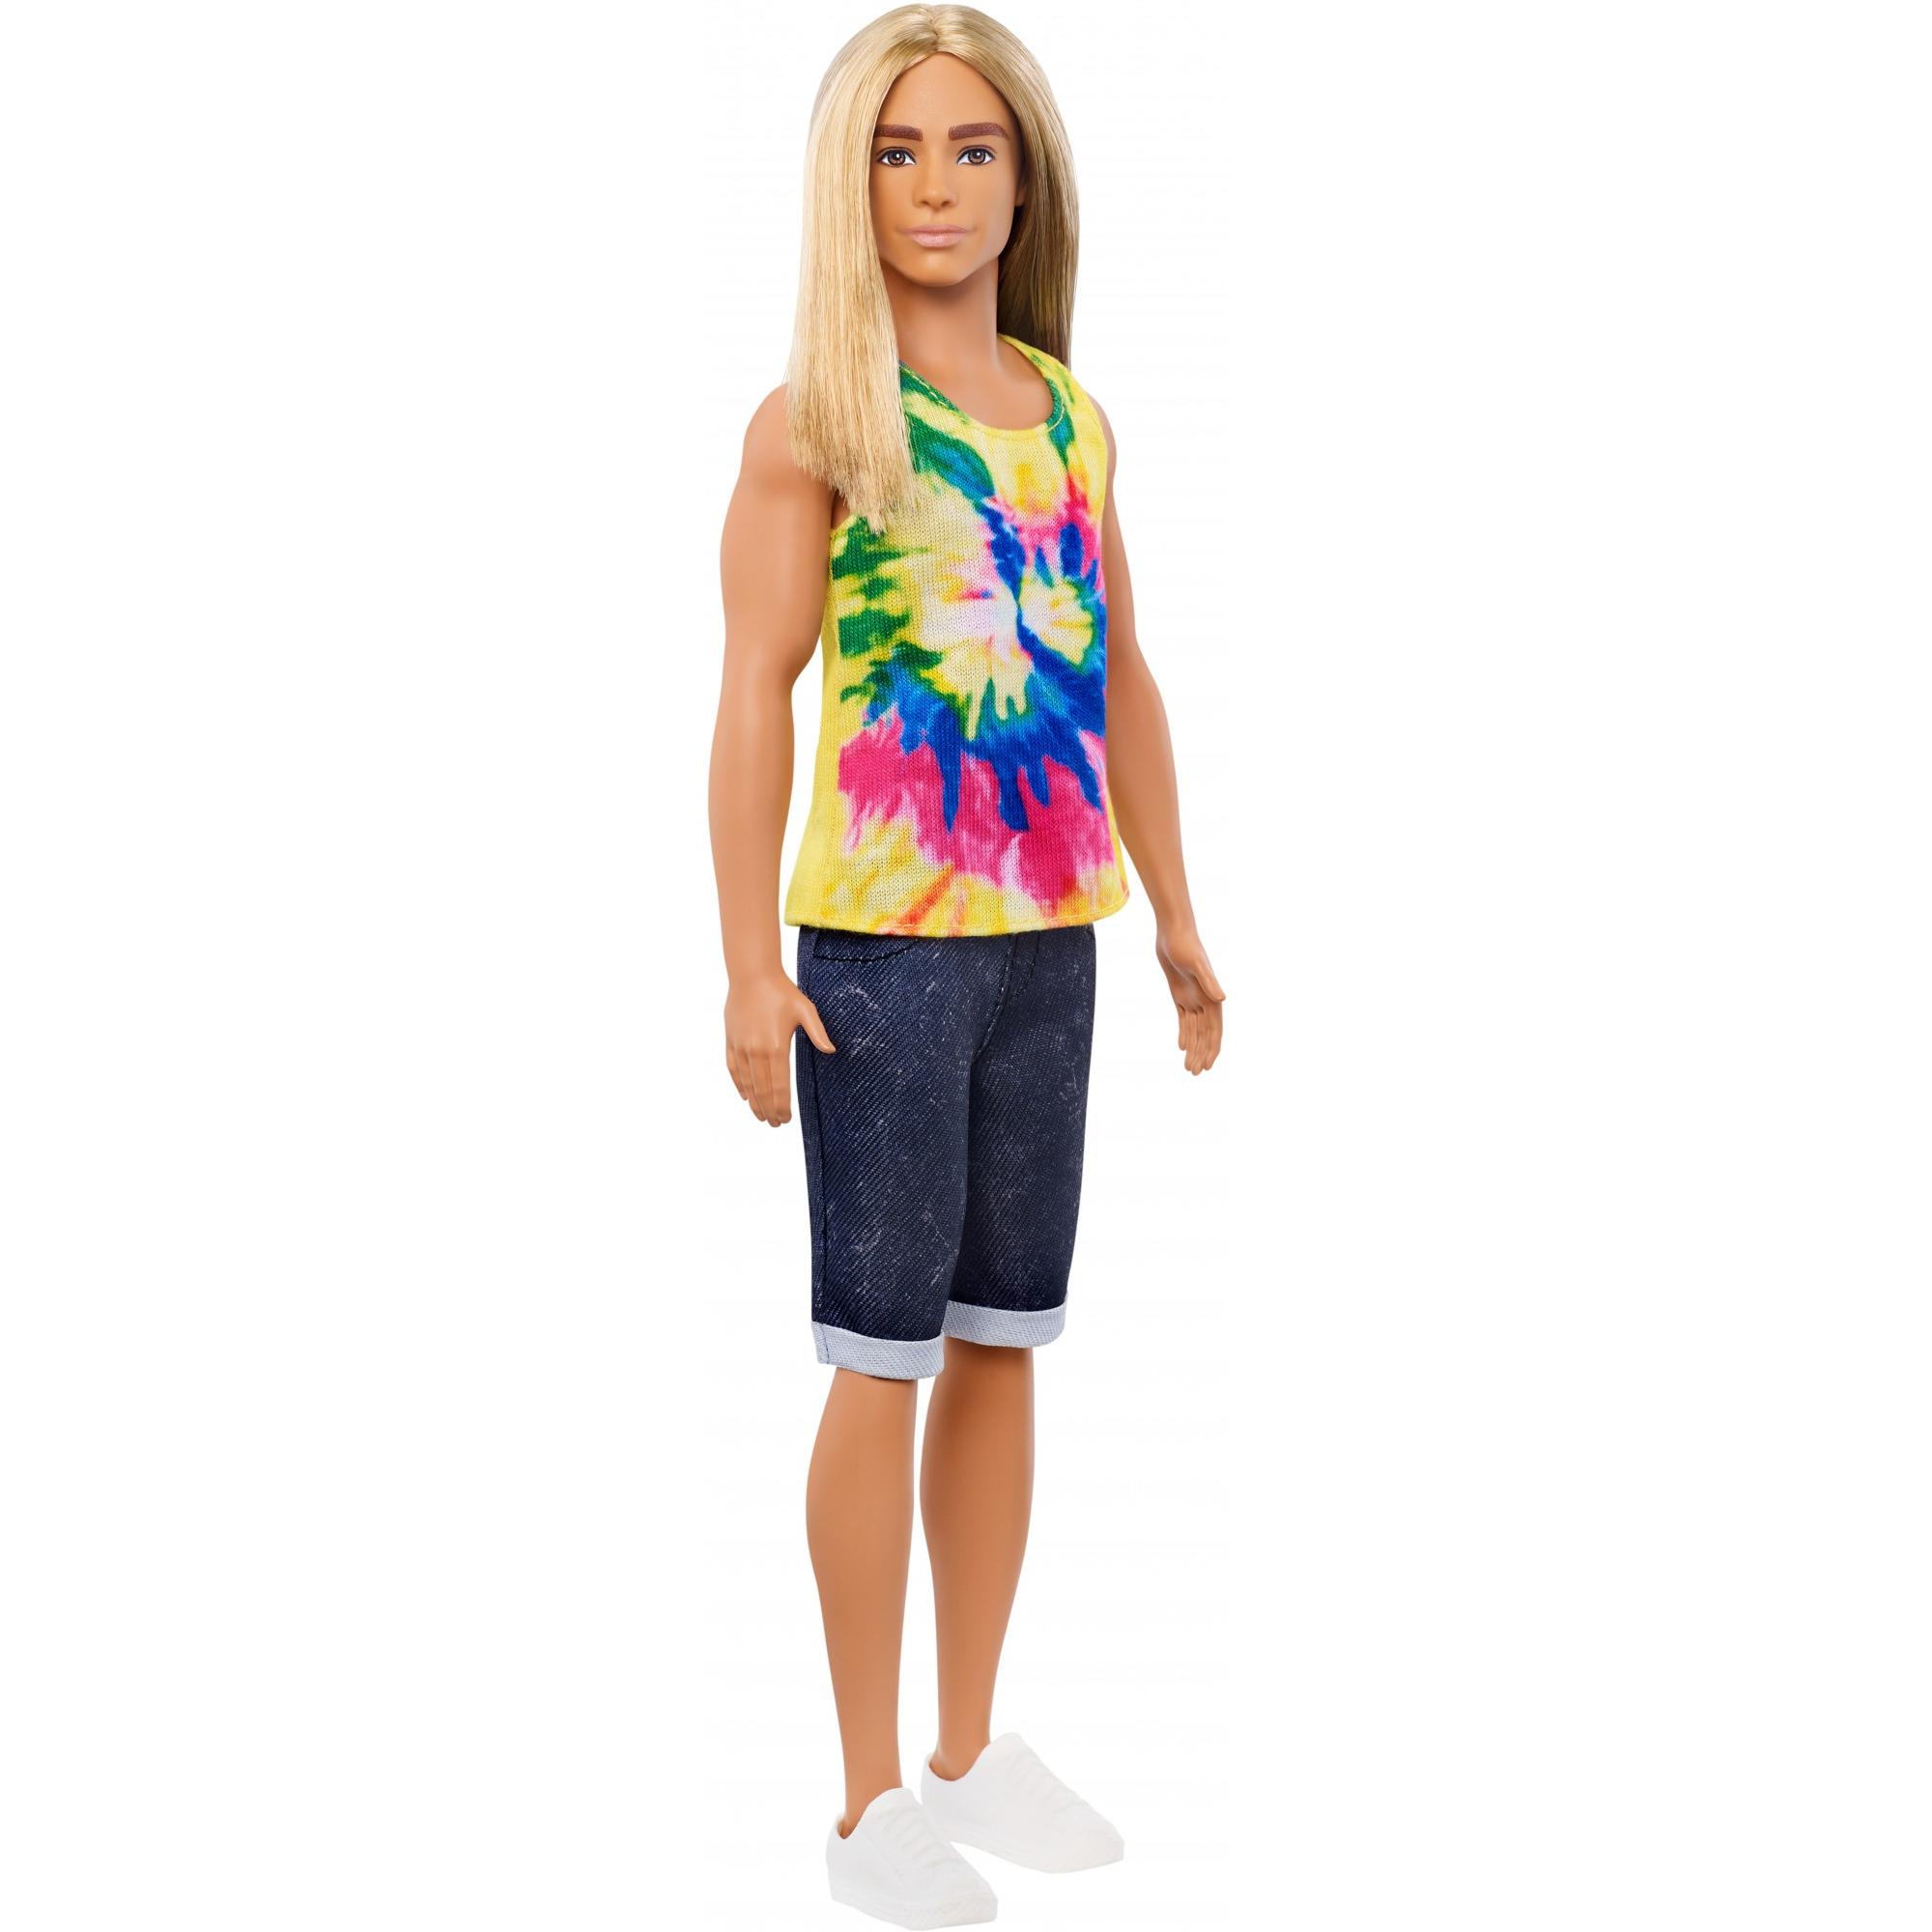 Ken Fashionistas Doll with Long Blonde Hair, Wearing Tie-Dye Shirt, Denim Shorts and Shoes, for 3 to 8 Year Olds - image 1 of 7